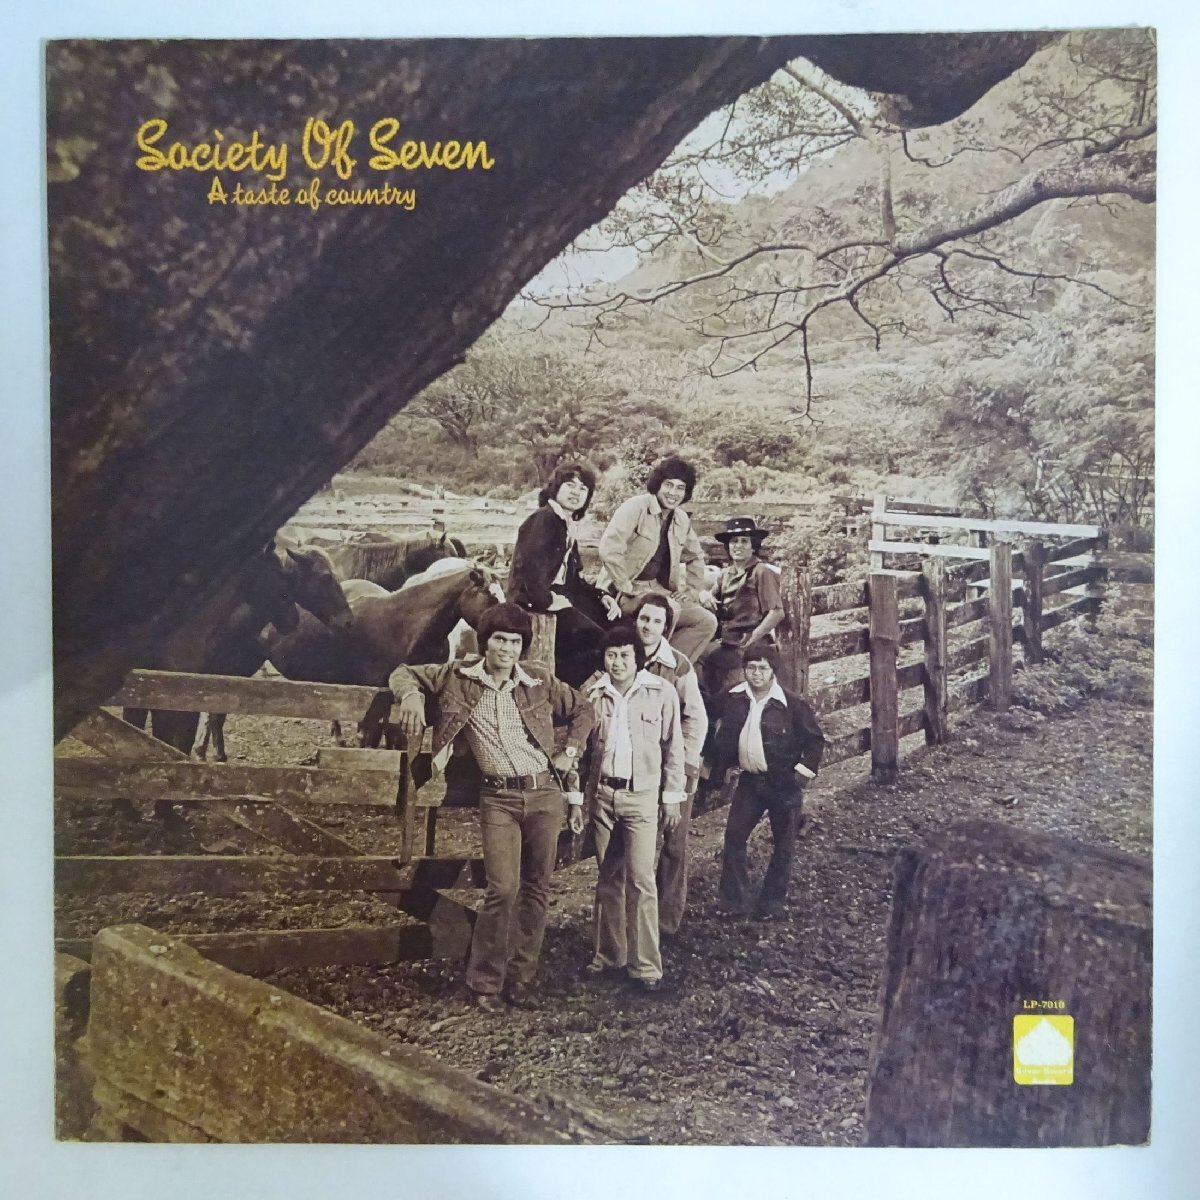 11187817;【US盤】Society Of Seven / A Taste Of Country_画像1